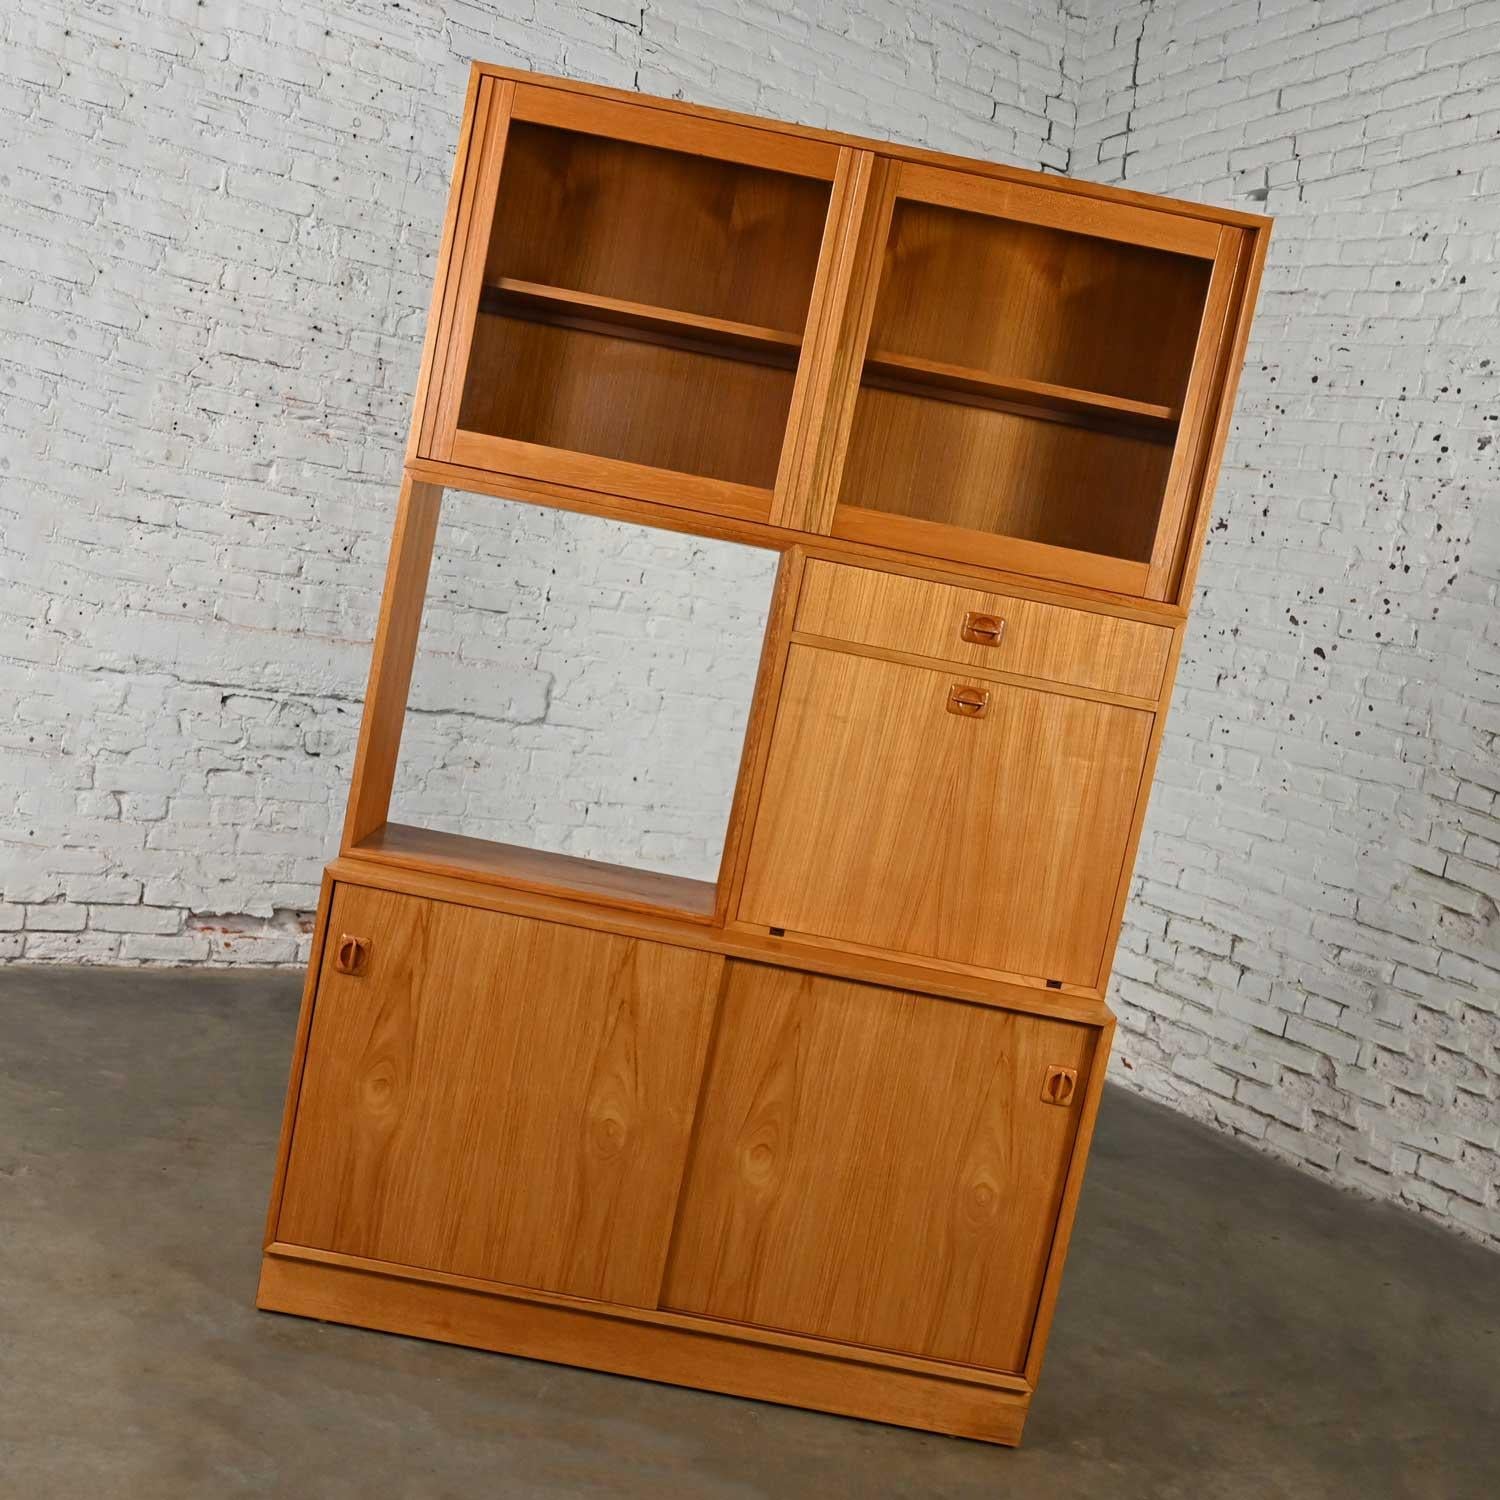 Scandinavian Modern Teak 4 Part Triple Stacked Secretary Display Cabinet Dry Bar In Good Condition For Sale In Topeka, KS